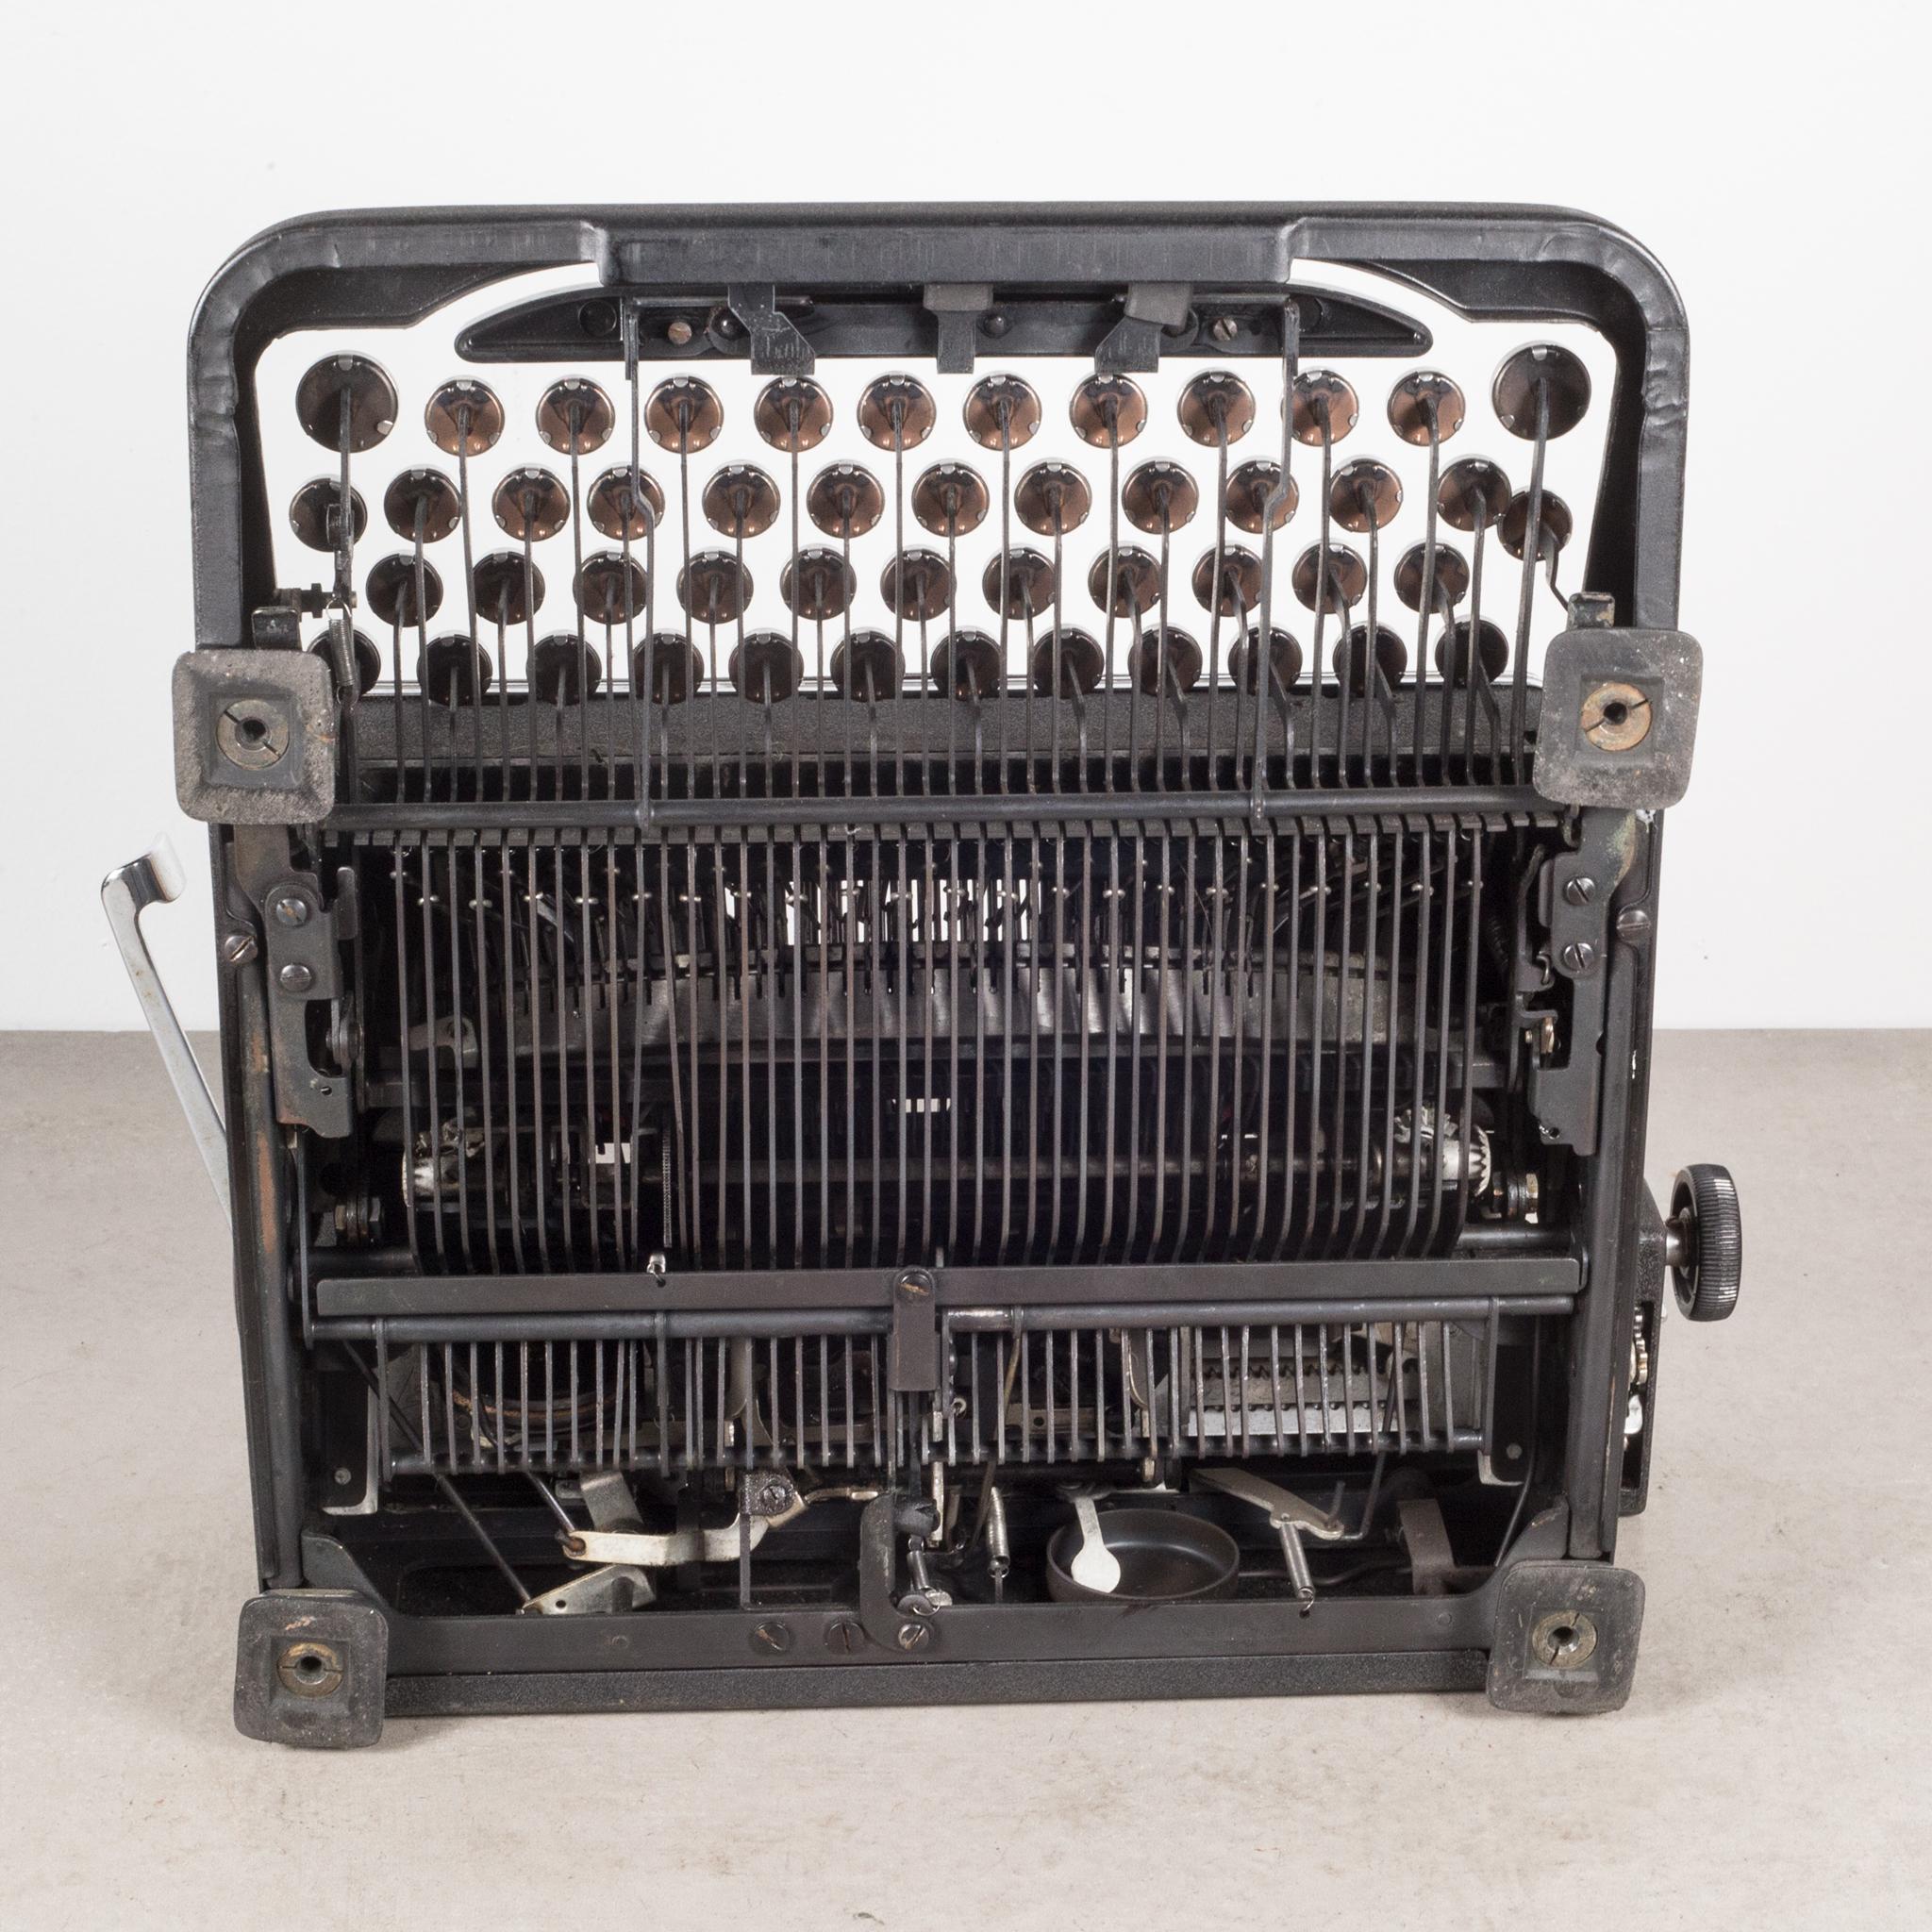 20th Century Fully Refurbished Royal Quiet DeLuxe Typewriter with Black Crinkle Finish c.1939